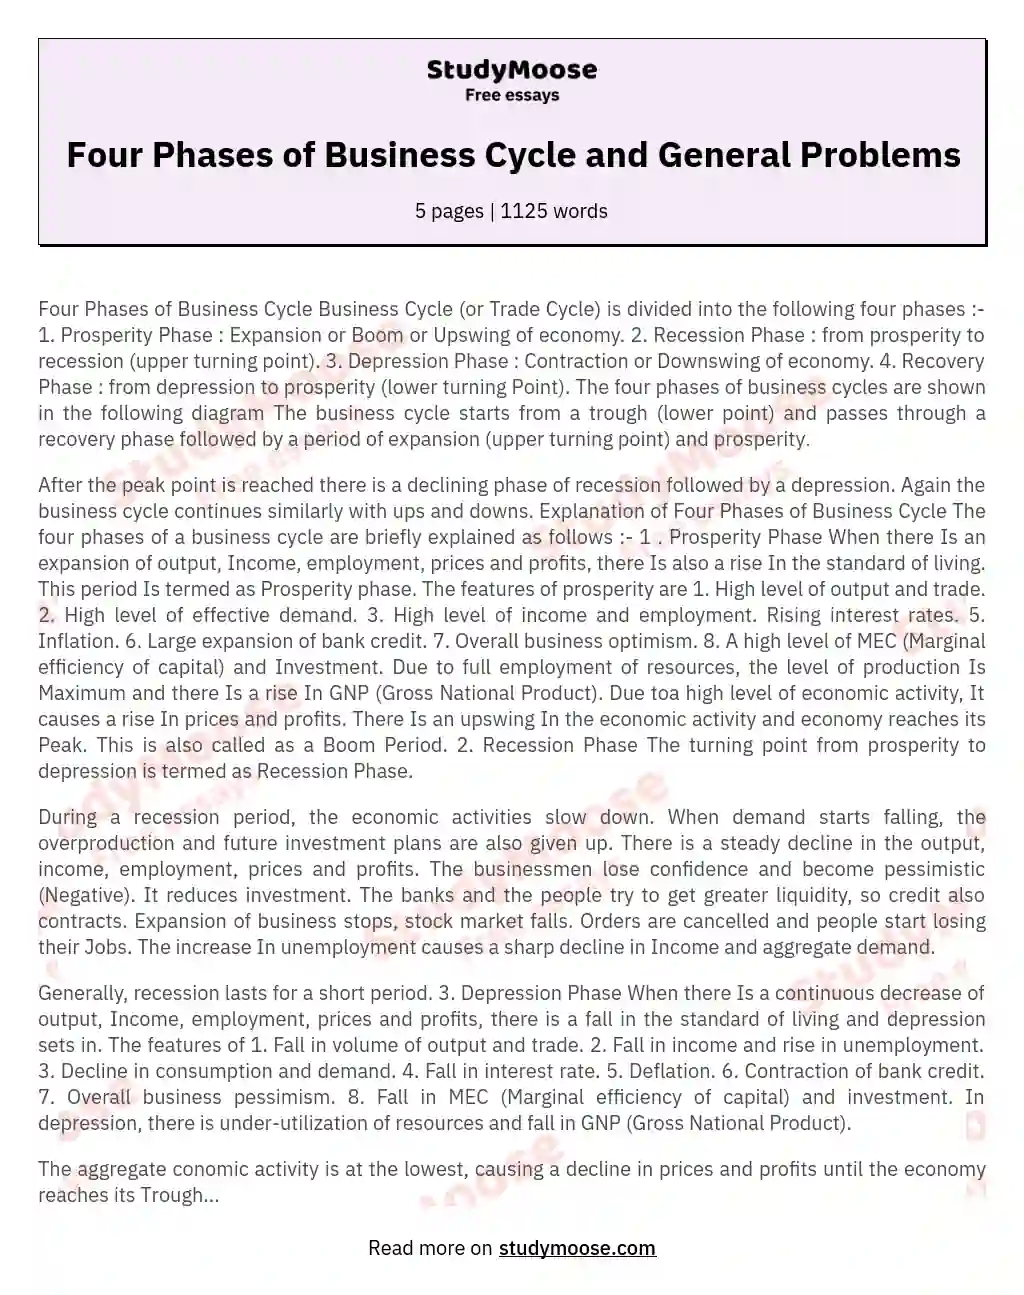 Four Phases of Business Cycle and General Problems essay